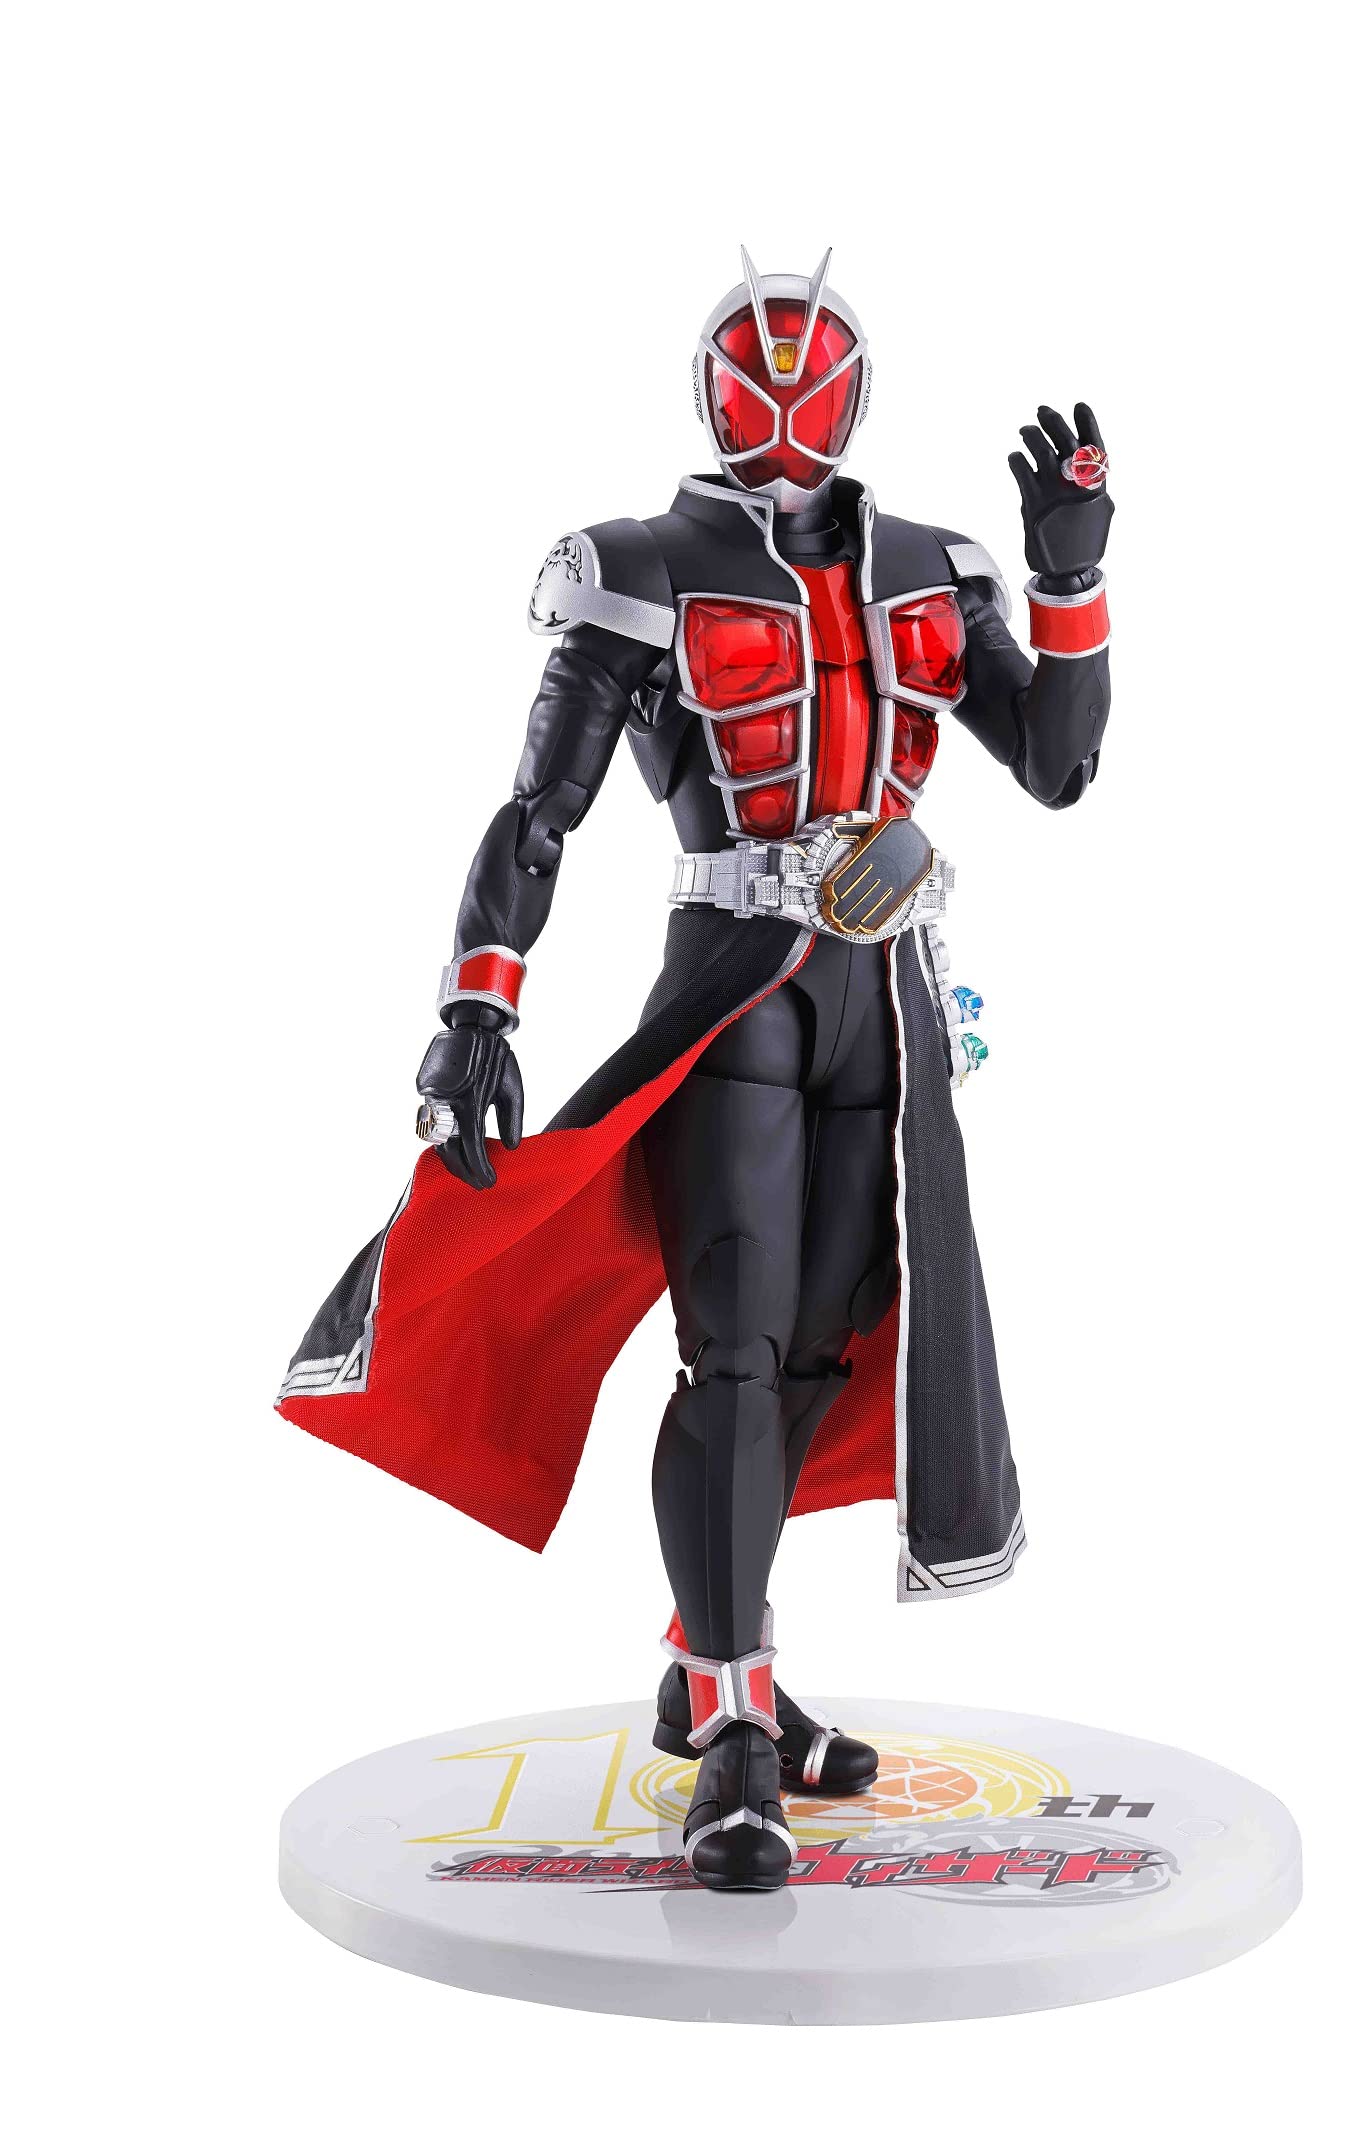 S.H. Figuarts (True Bone Carving Method) Kamen Rider Wizard Flame Style 10th Anniversary Version, Approx. 5.7 inches (145 mm), ABS & PVC & Cloth, Painted Action Figure